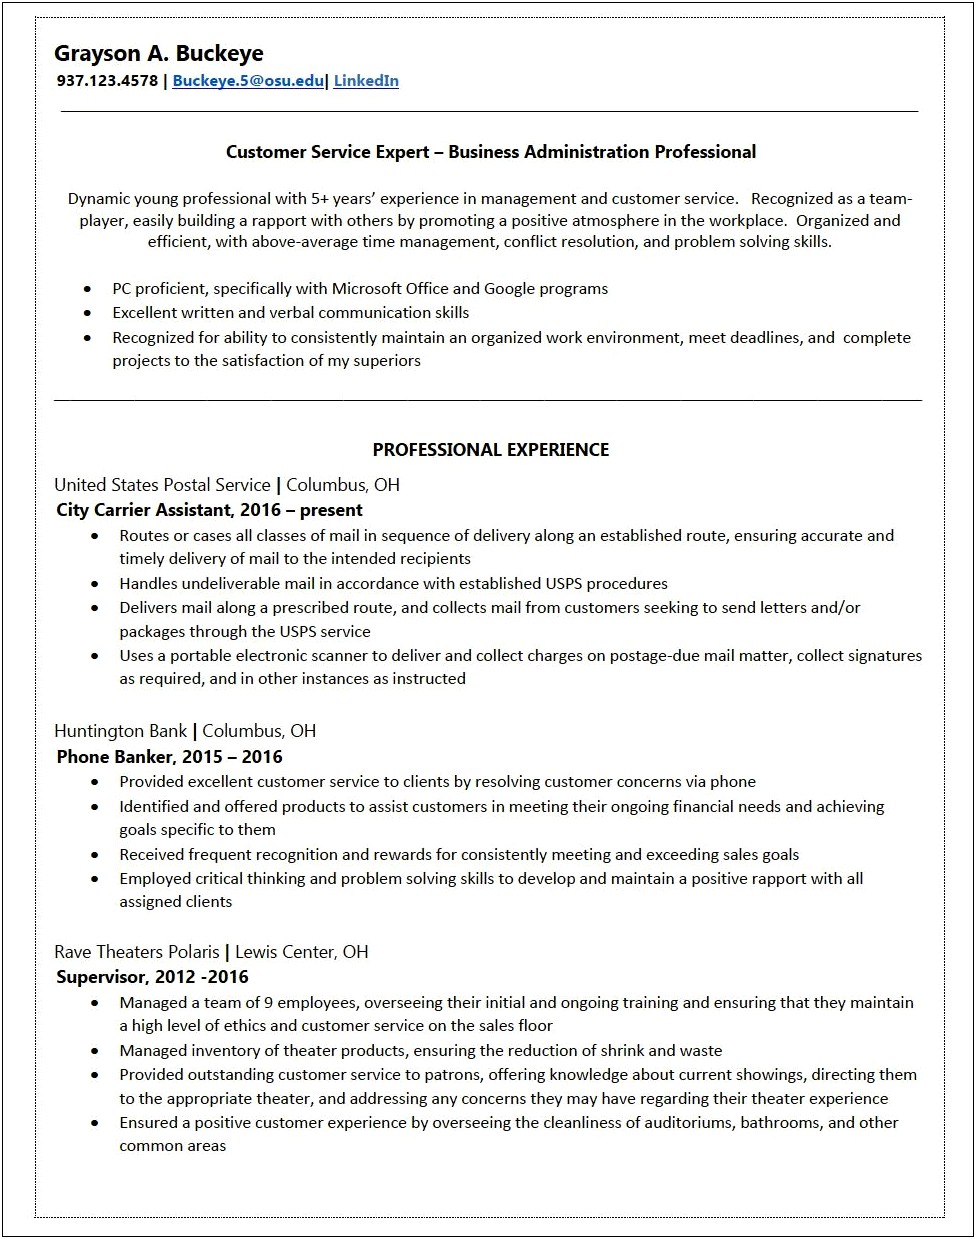 Swarthmore Career Services Resume And Cover Letter Guide